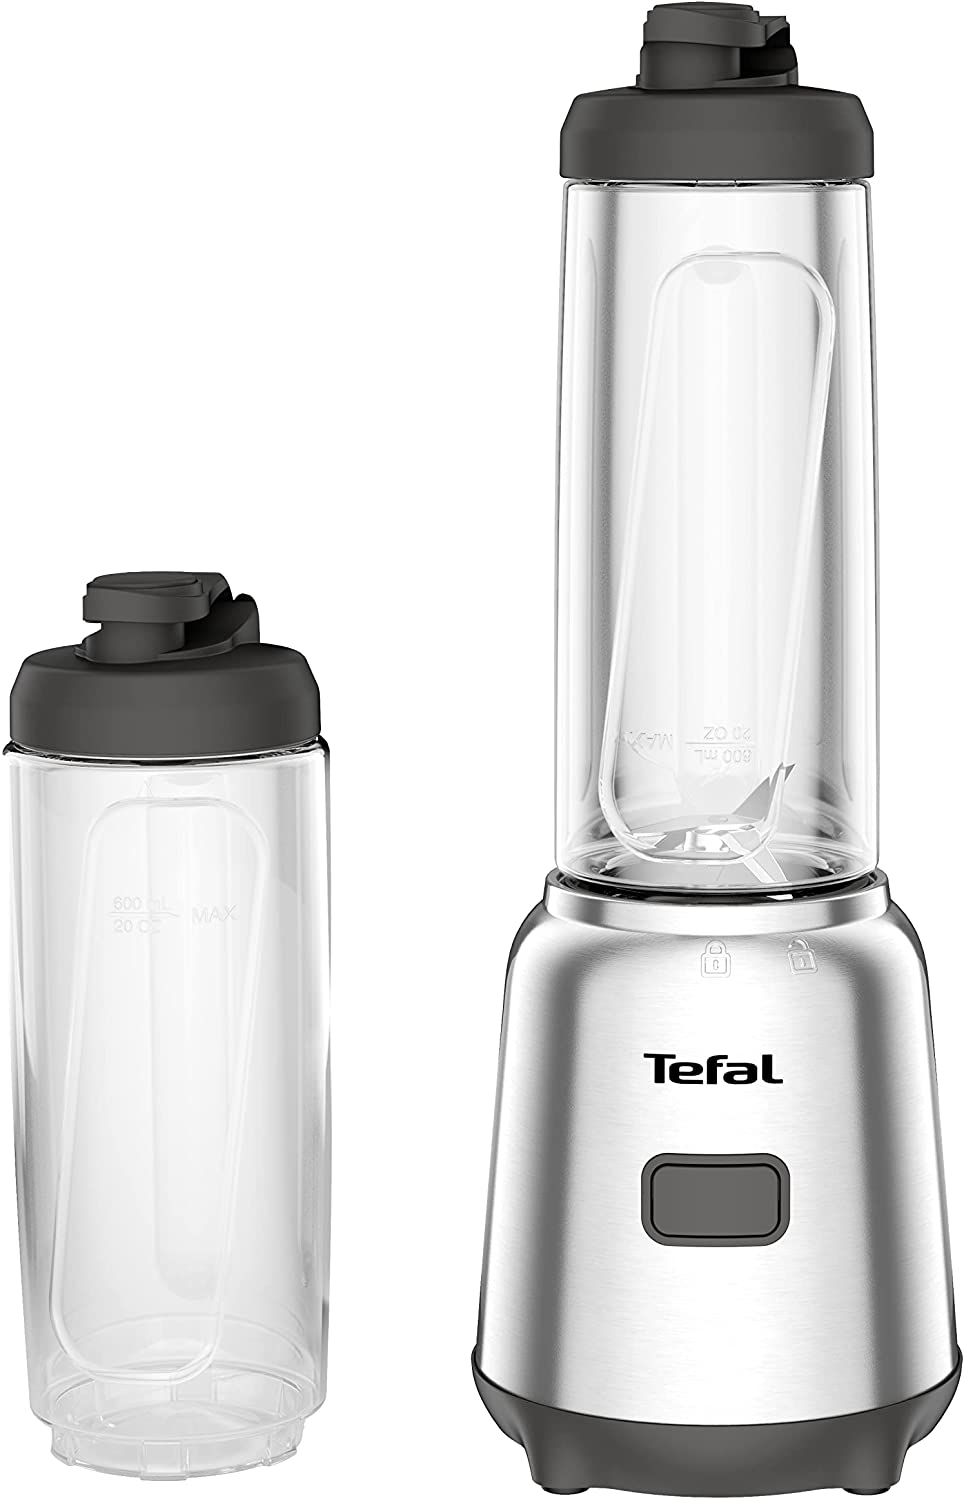 Tefal BL15FD Mix & Move Mini Blender | 300 Watt | 2 Bottles To-Go in Premium Tritan | Compact Design | Easy to Clean | Removable Blades | Single Button Operation | Silver/Grey